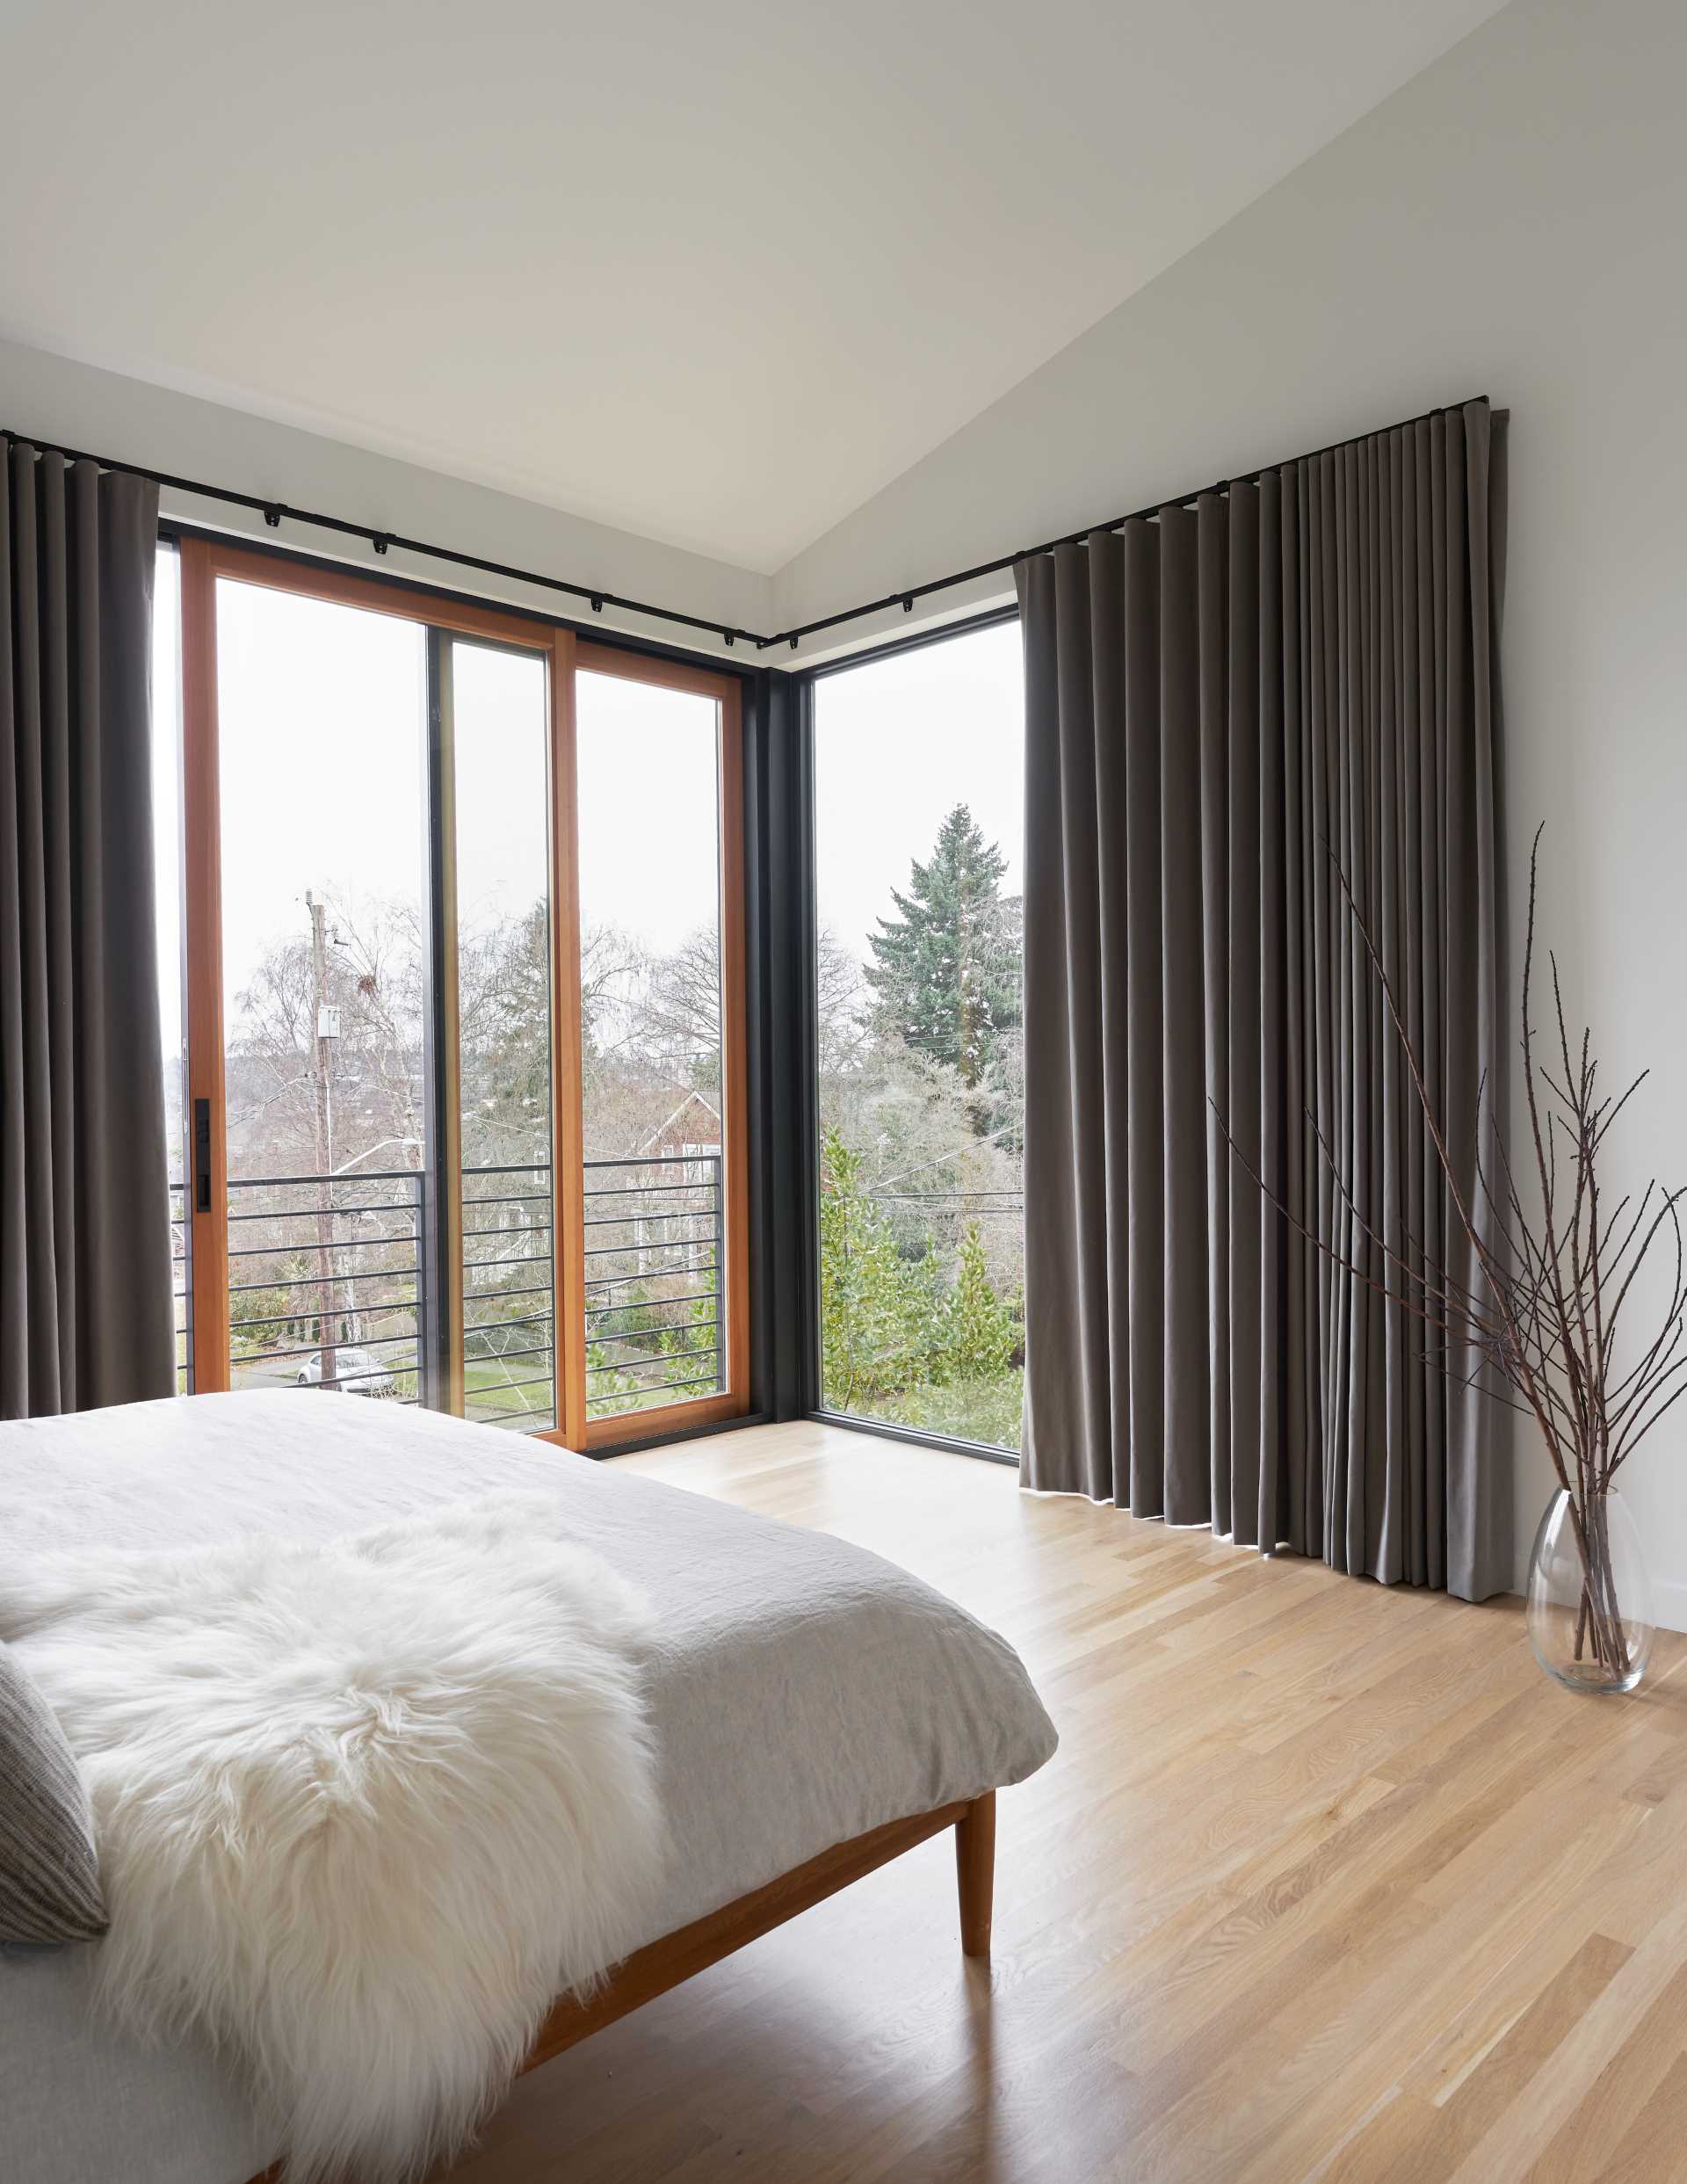 A modern bedroom with large windows that add natural light, while a sliding door can be opened.